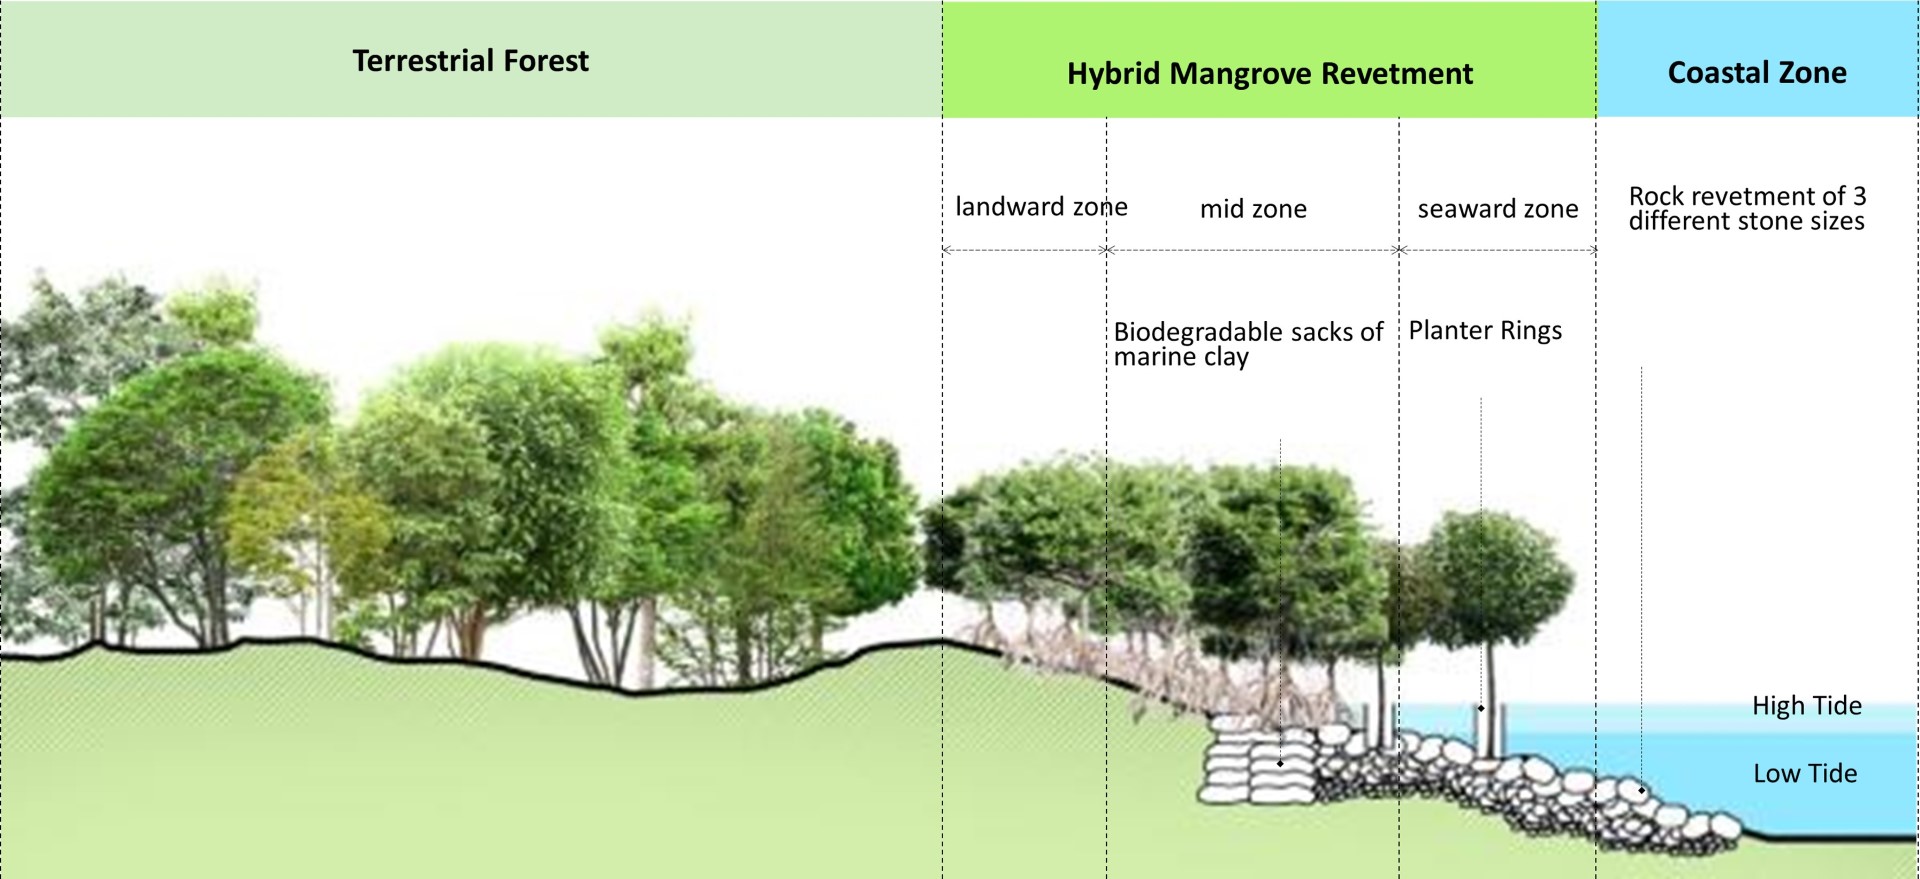 08 Hybrid Mangrove Revetment Section at River Mouth Large